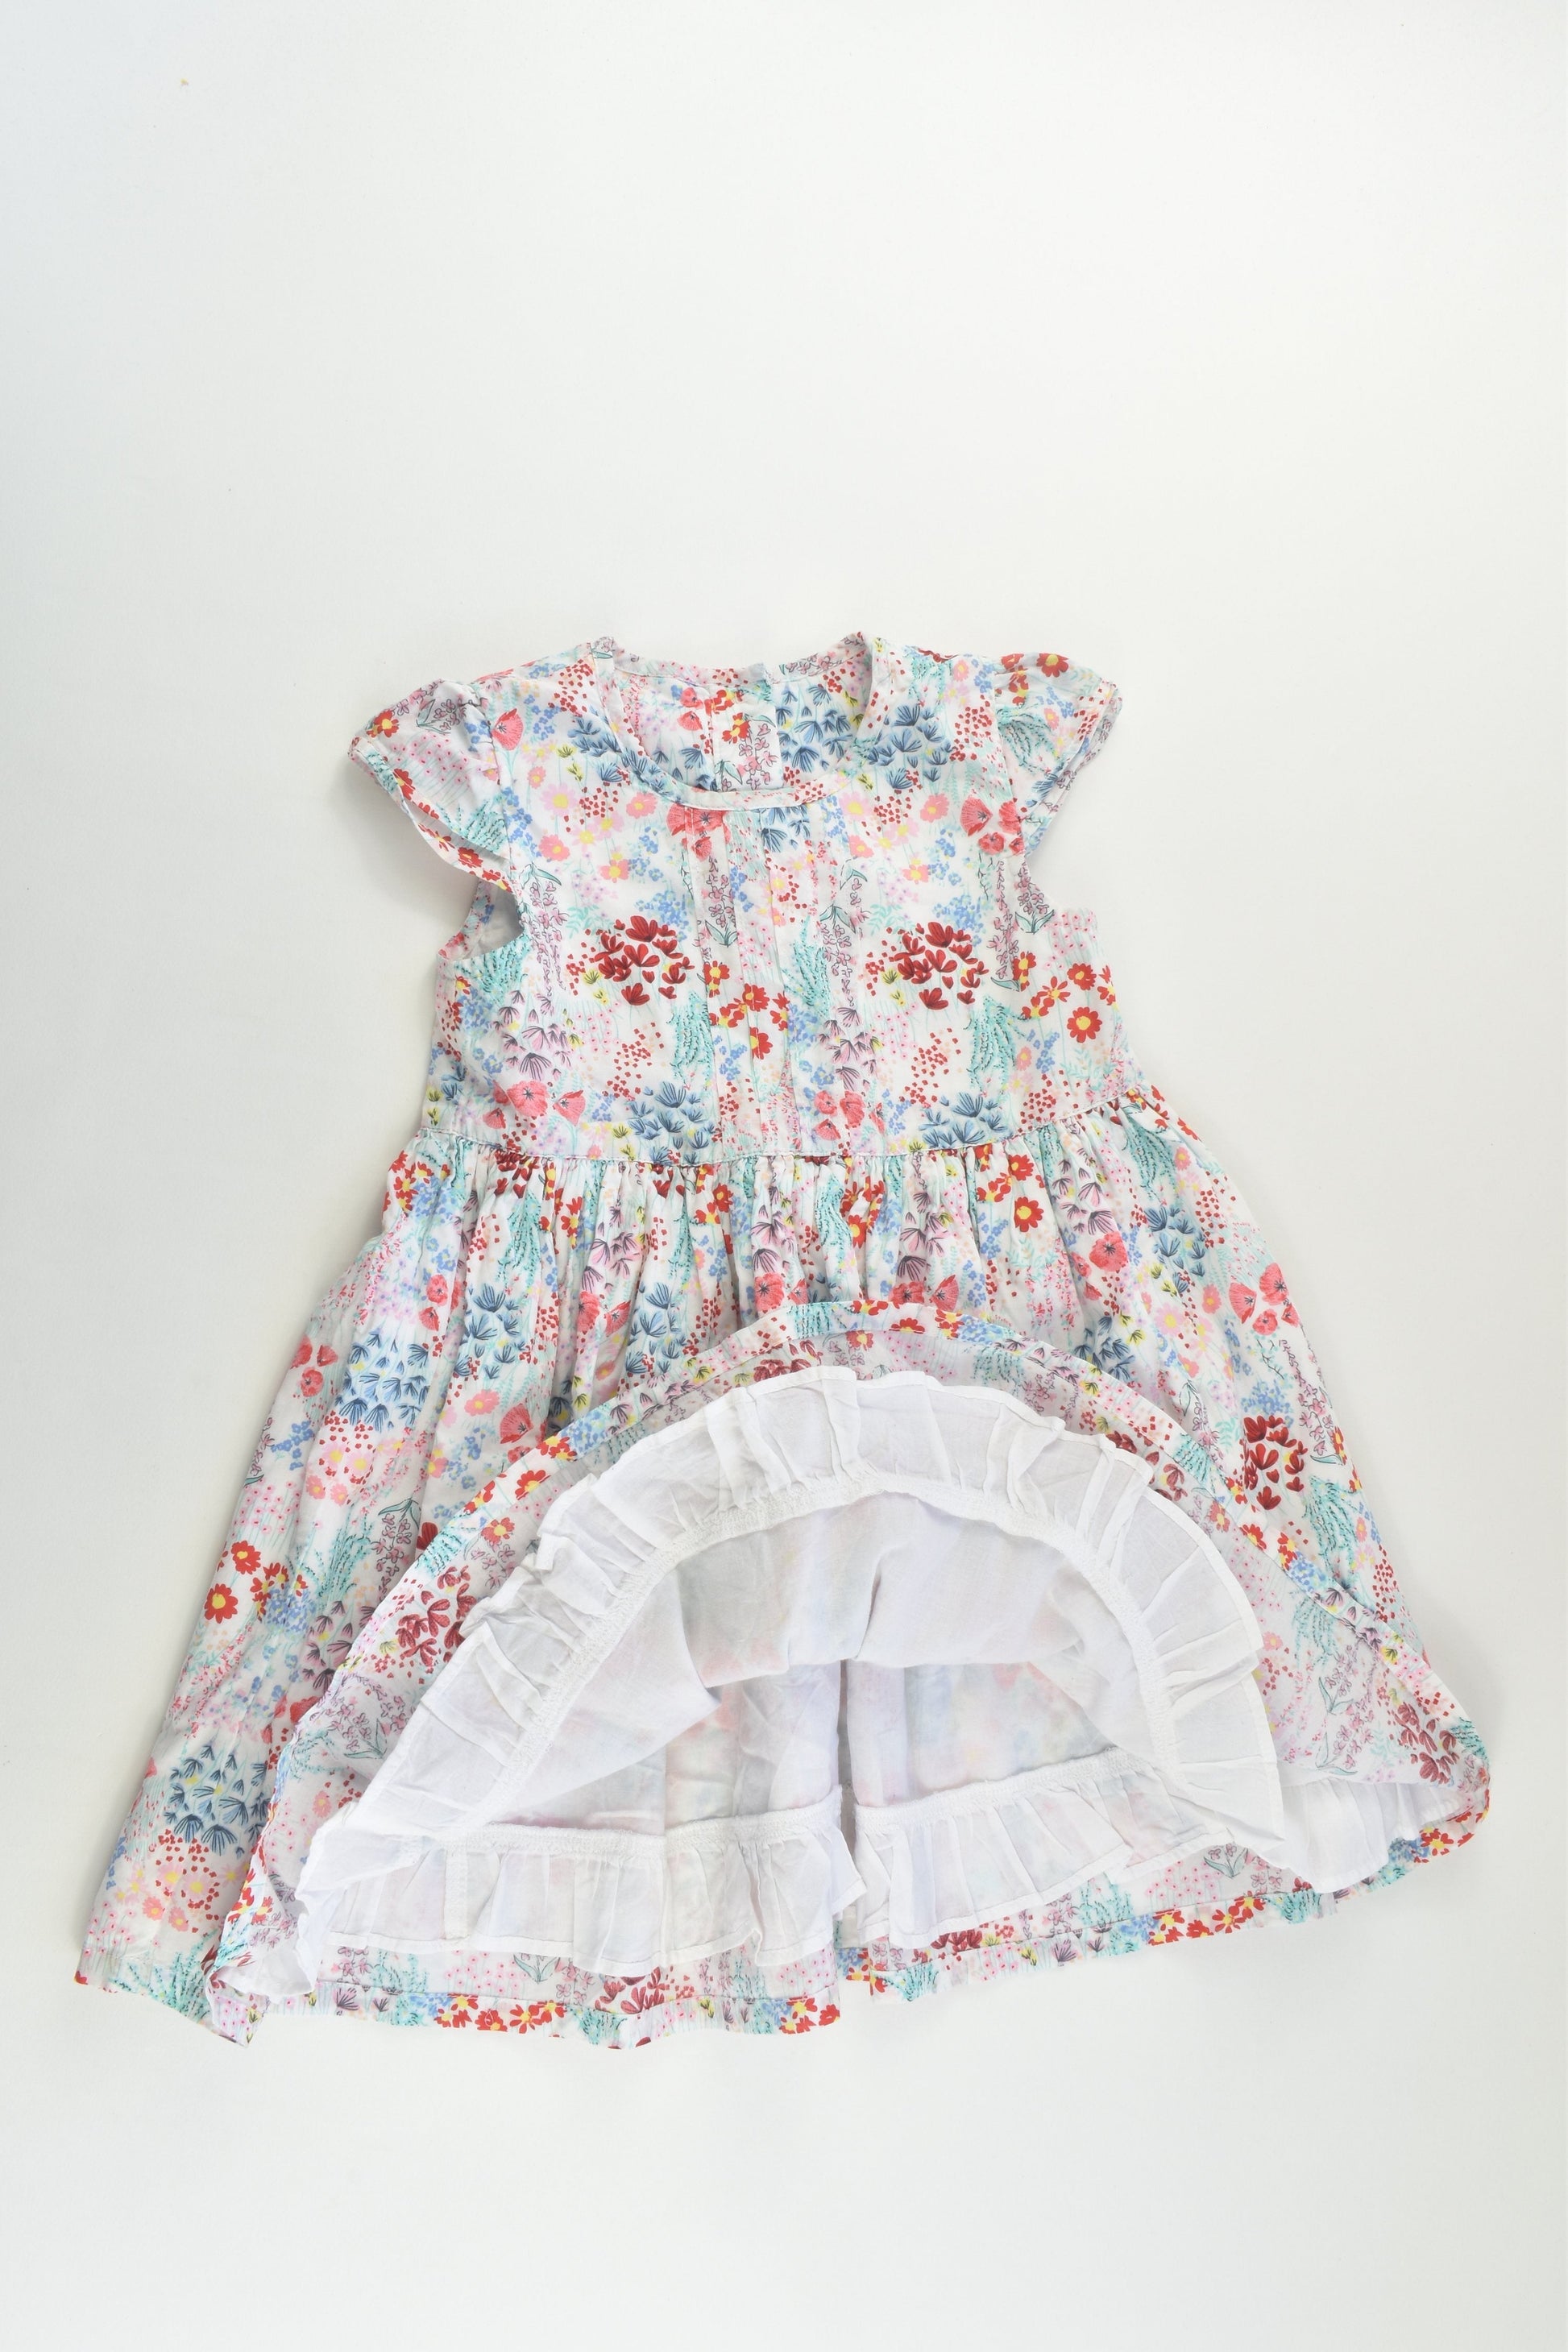 George Size 2 (18-24 months, 86.92 cm) Lined Floral Dress